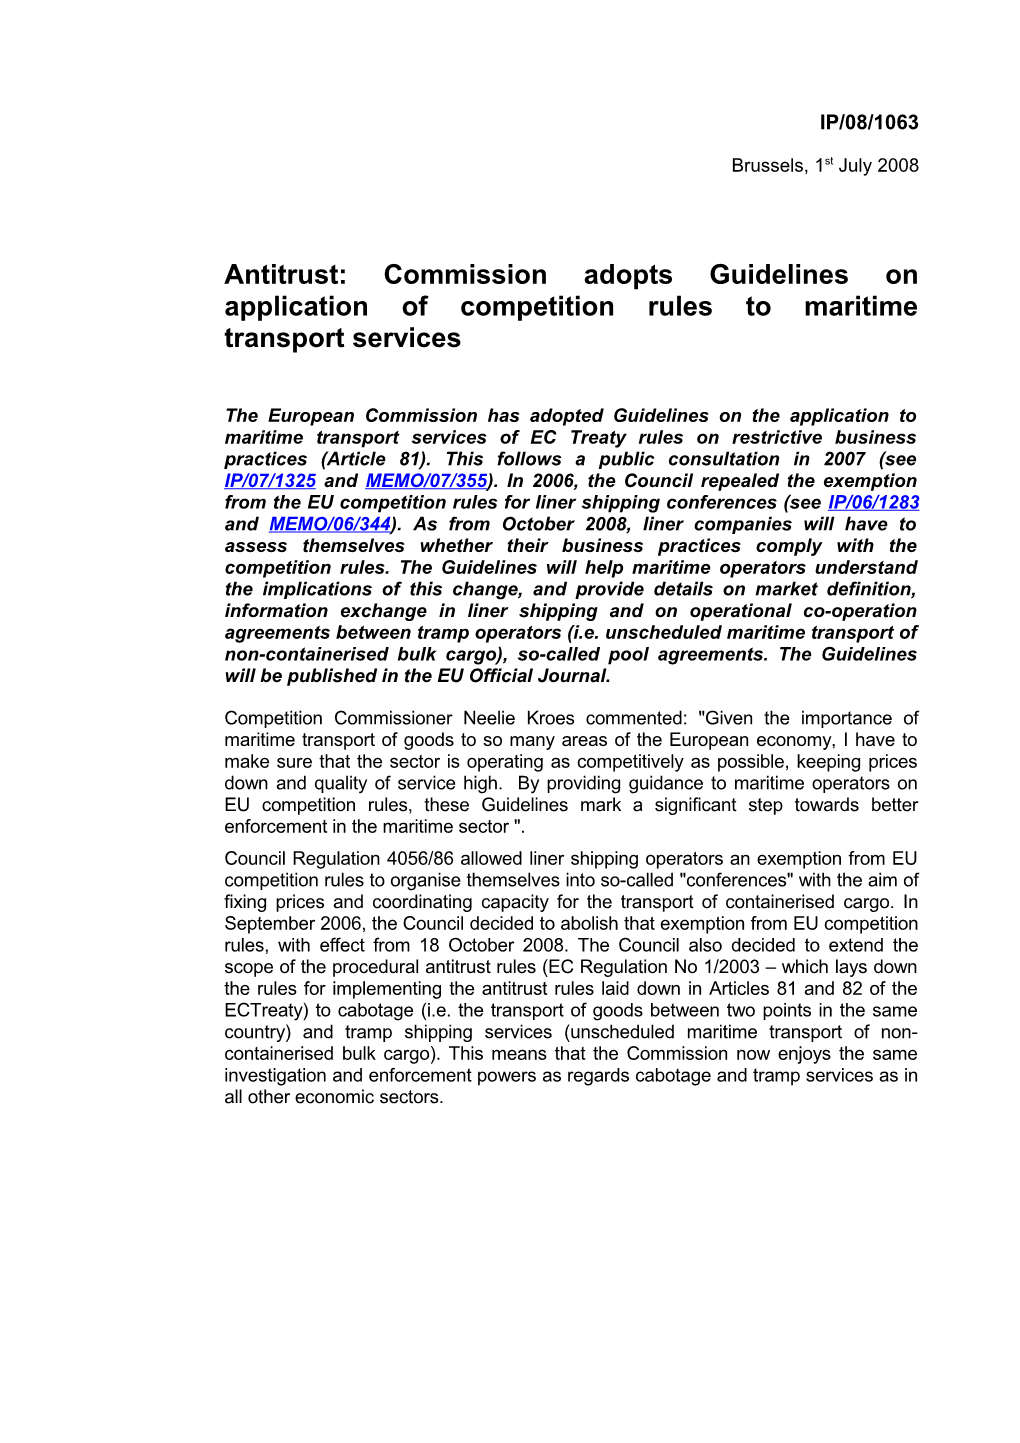 Antitrust: Commission Adopts Guidelines on Application Ofcompetition Rules to Maritime